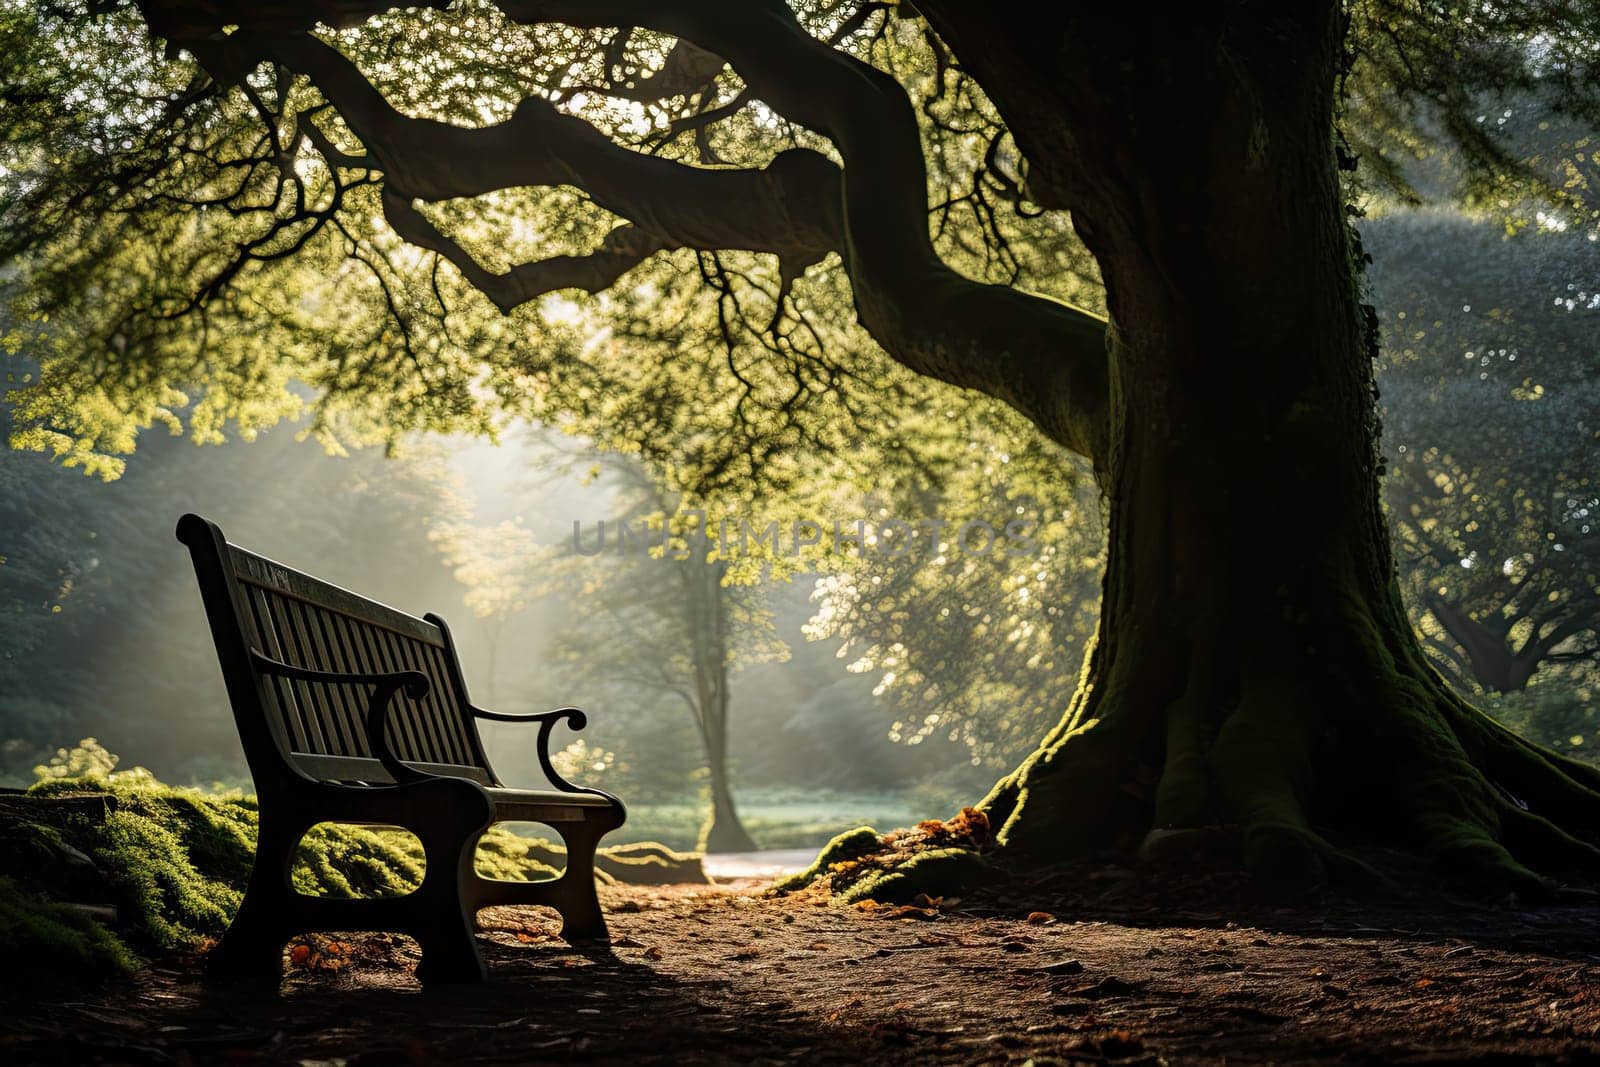 A Tranquil Oasis: A Serene Park Bench Underneath the Canopy of a Majestic Tree